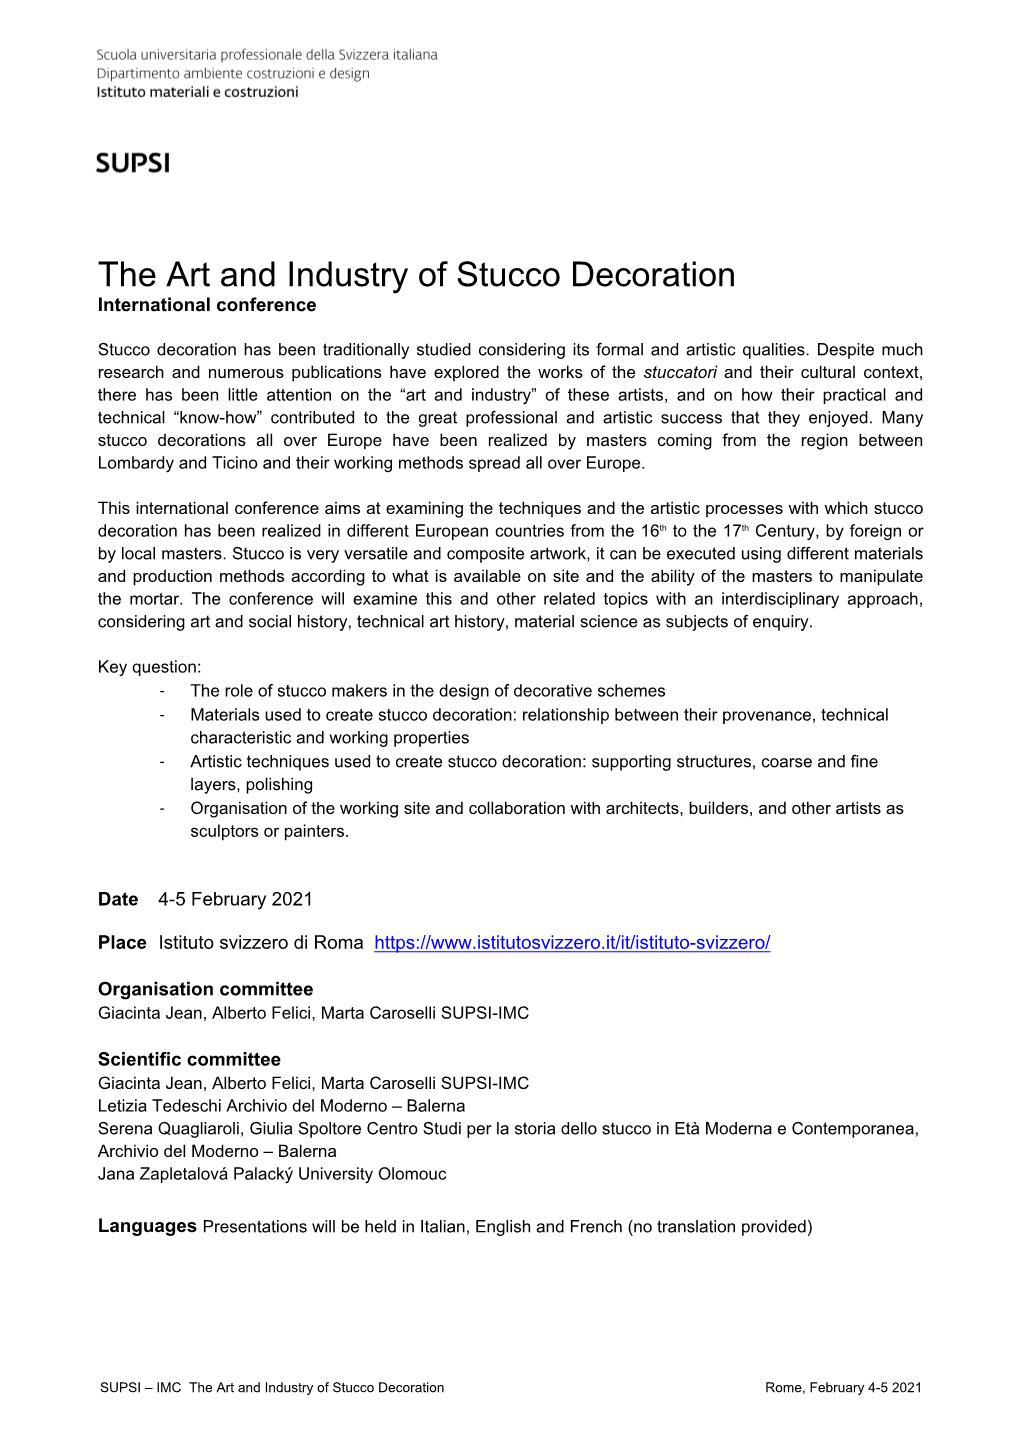 The Art and Industry of Stucco Decoration International Conference